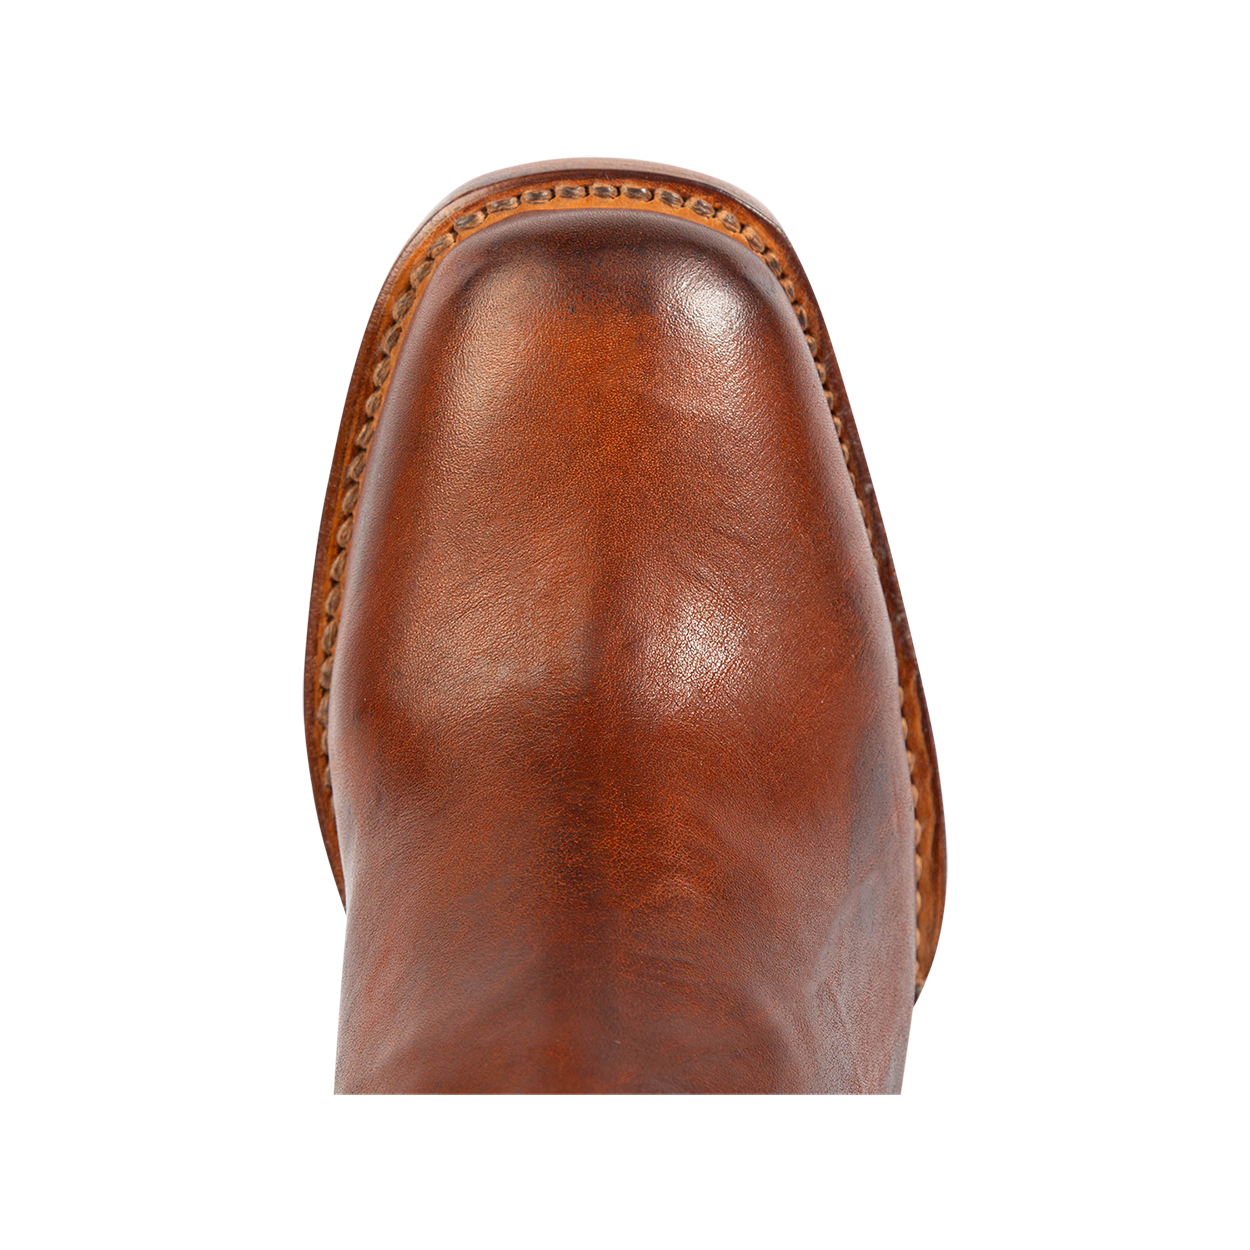 Top view showing square toe construction on FREEBIRD women's Dreamer whiskey leather bootie